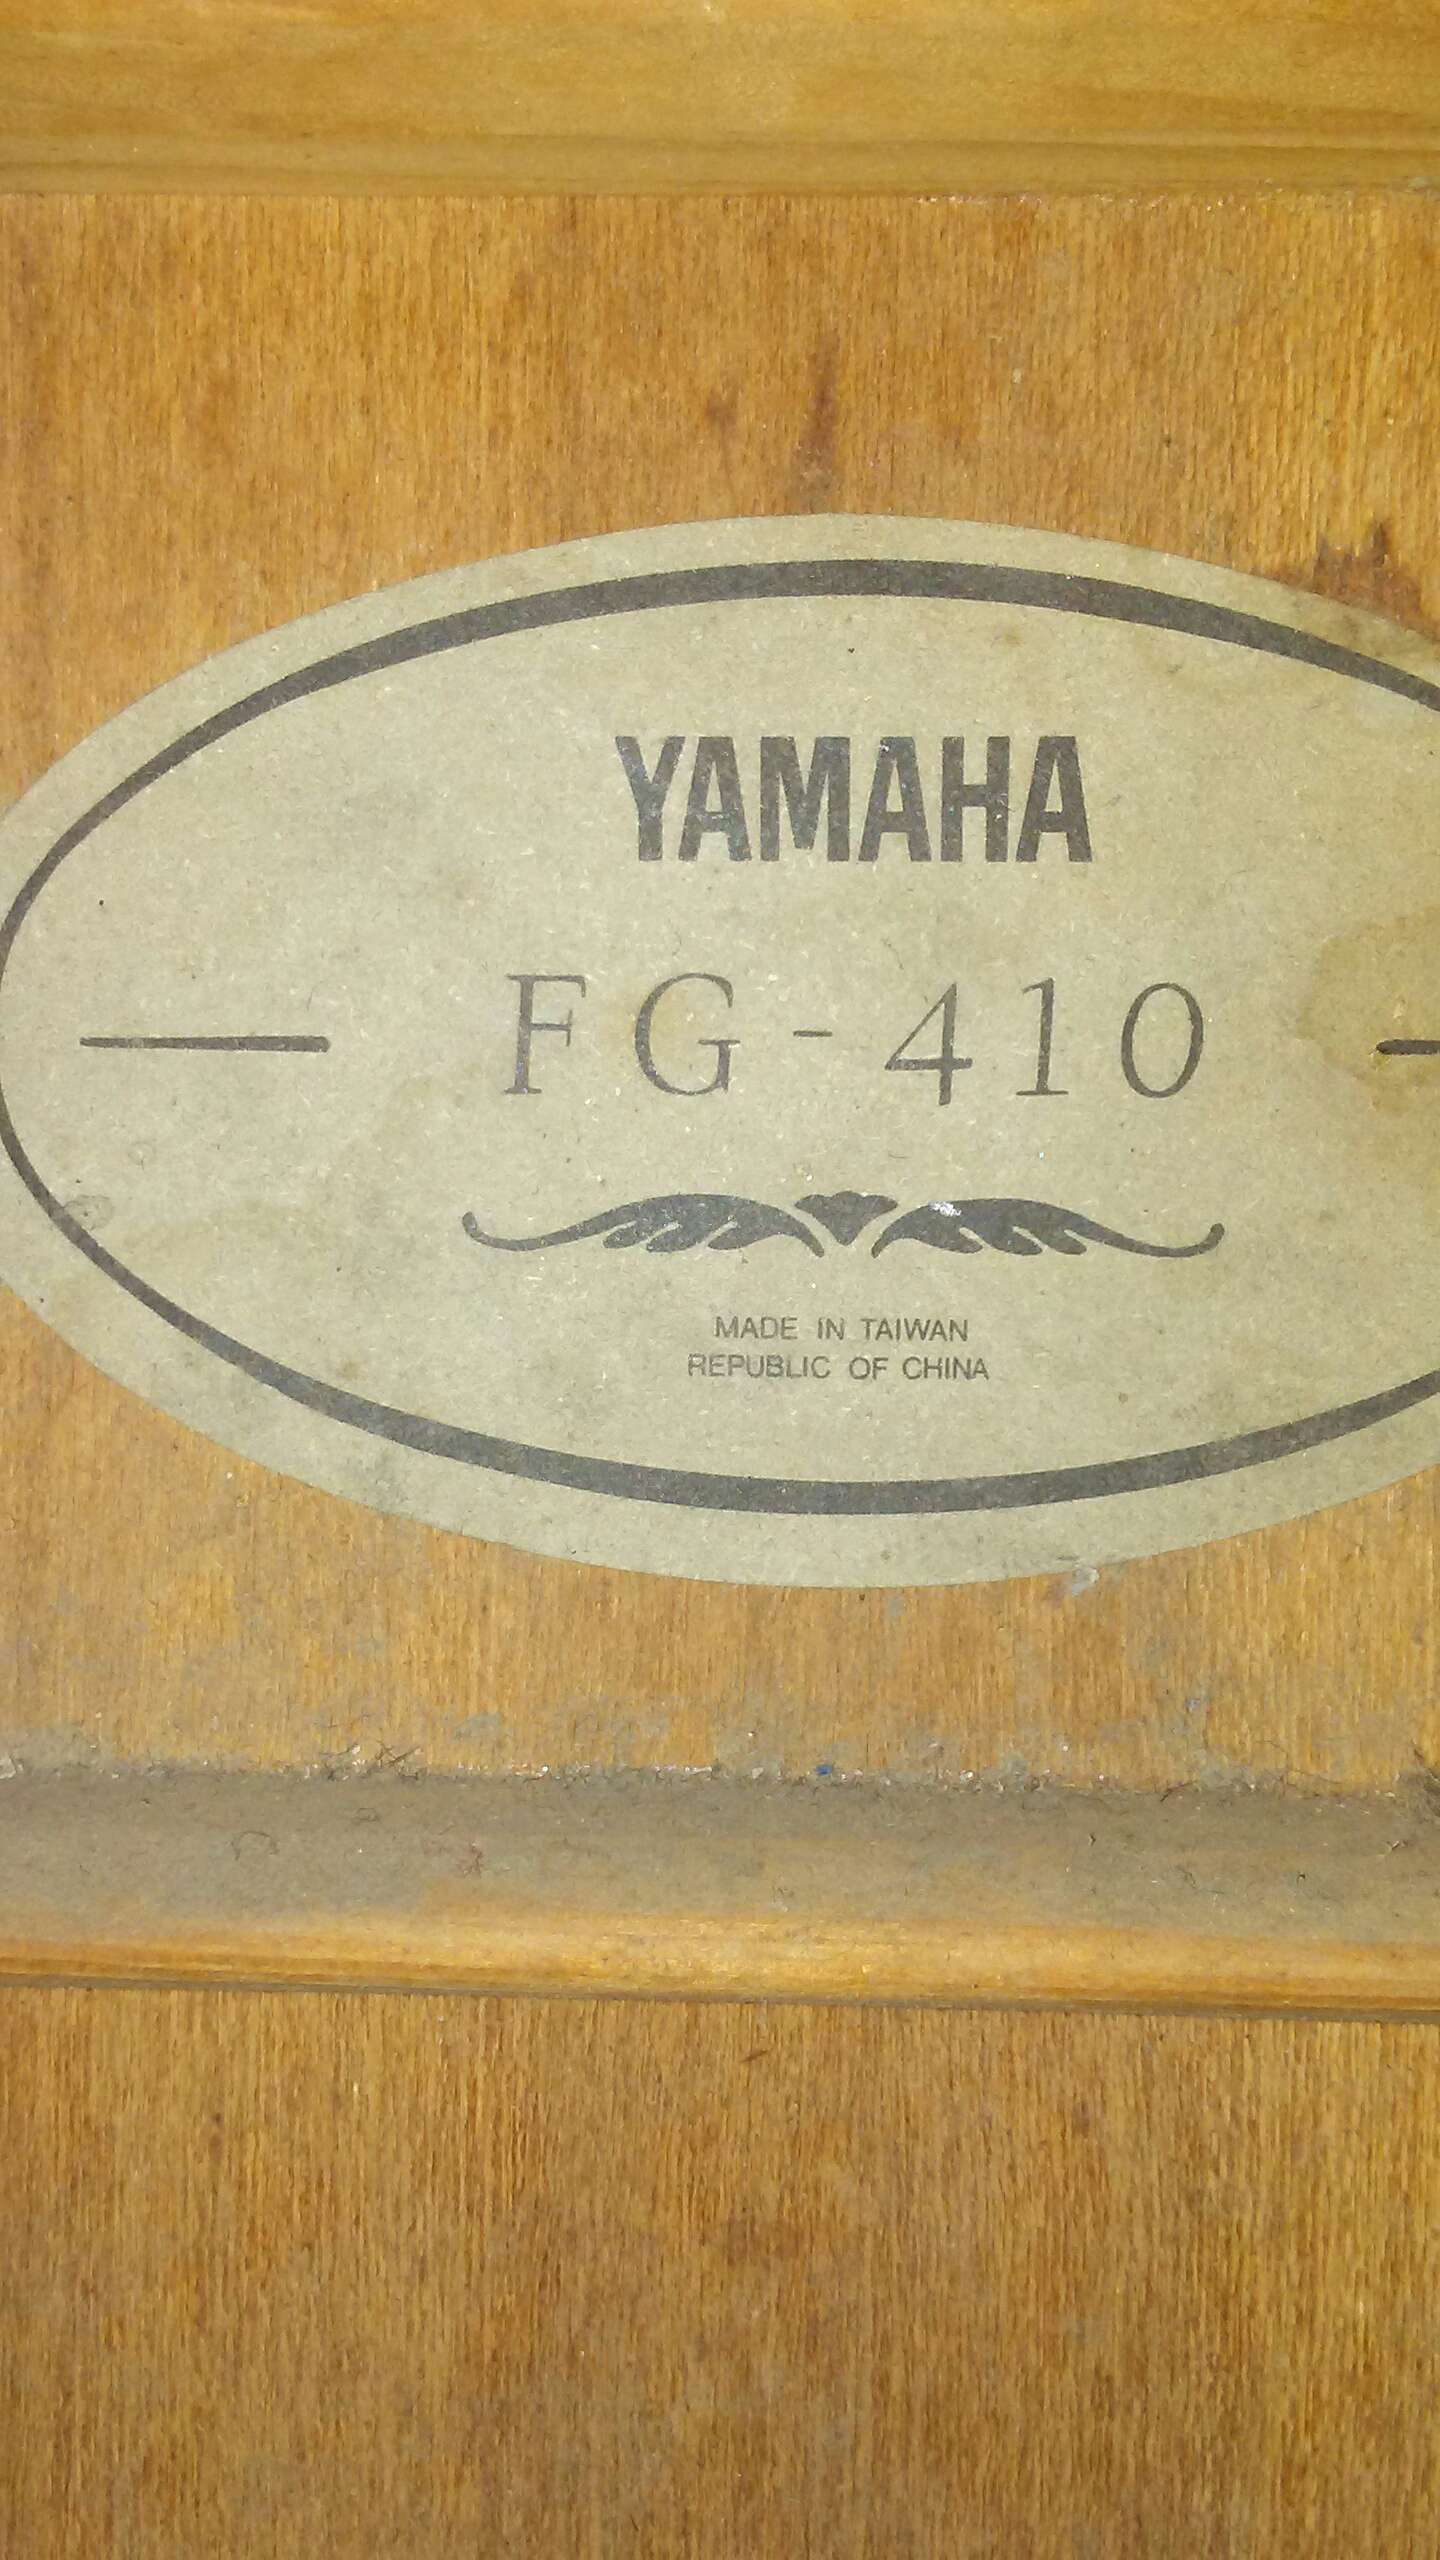 Yamaha FG 410 for sale in North Hills, CA - 5miles: Buy and Sell